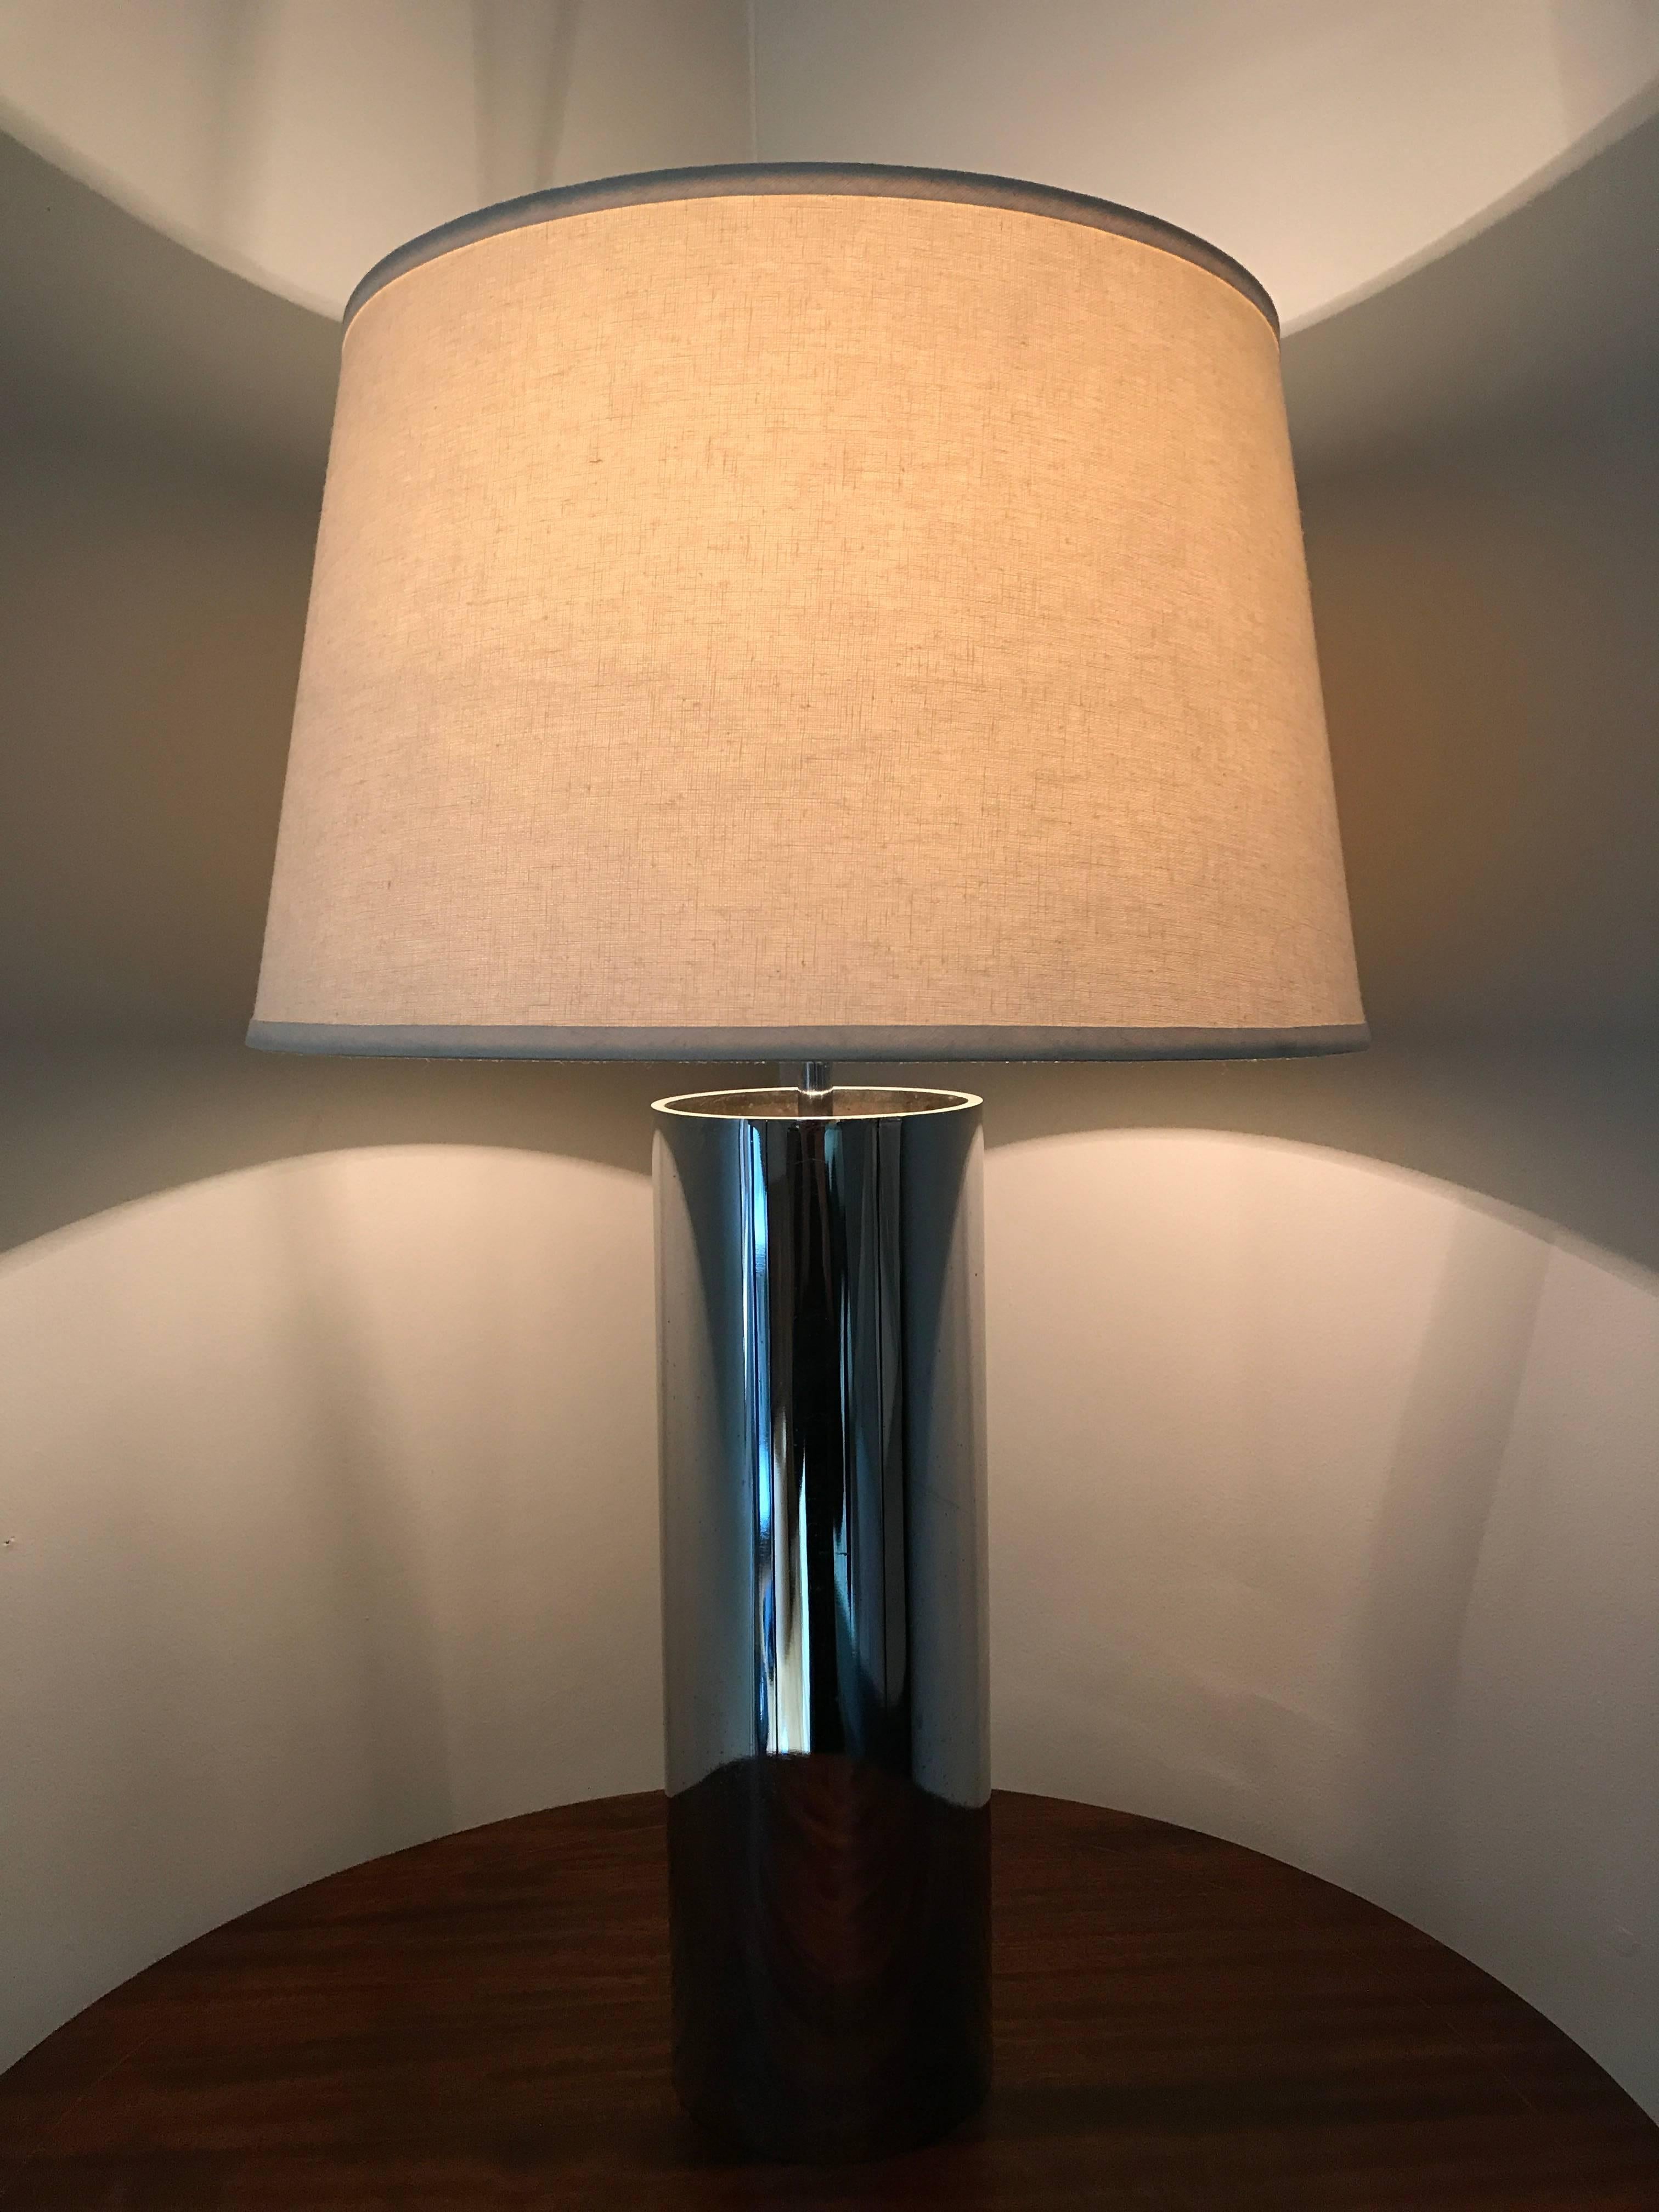 Mid-century chromed steel cylindrical table lamp. Heavy and solid construction. Shade for display purposes only.